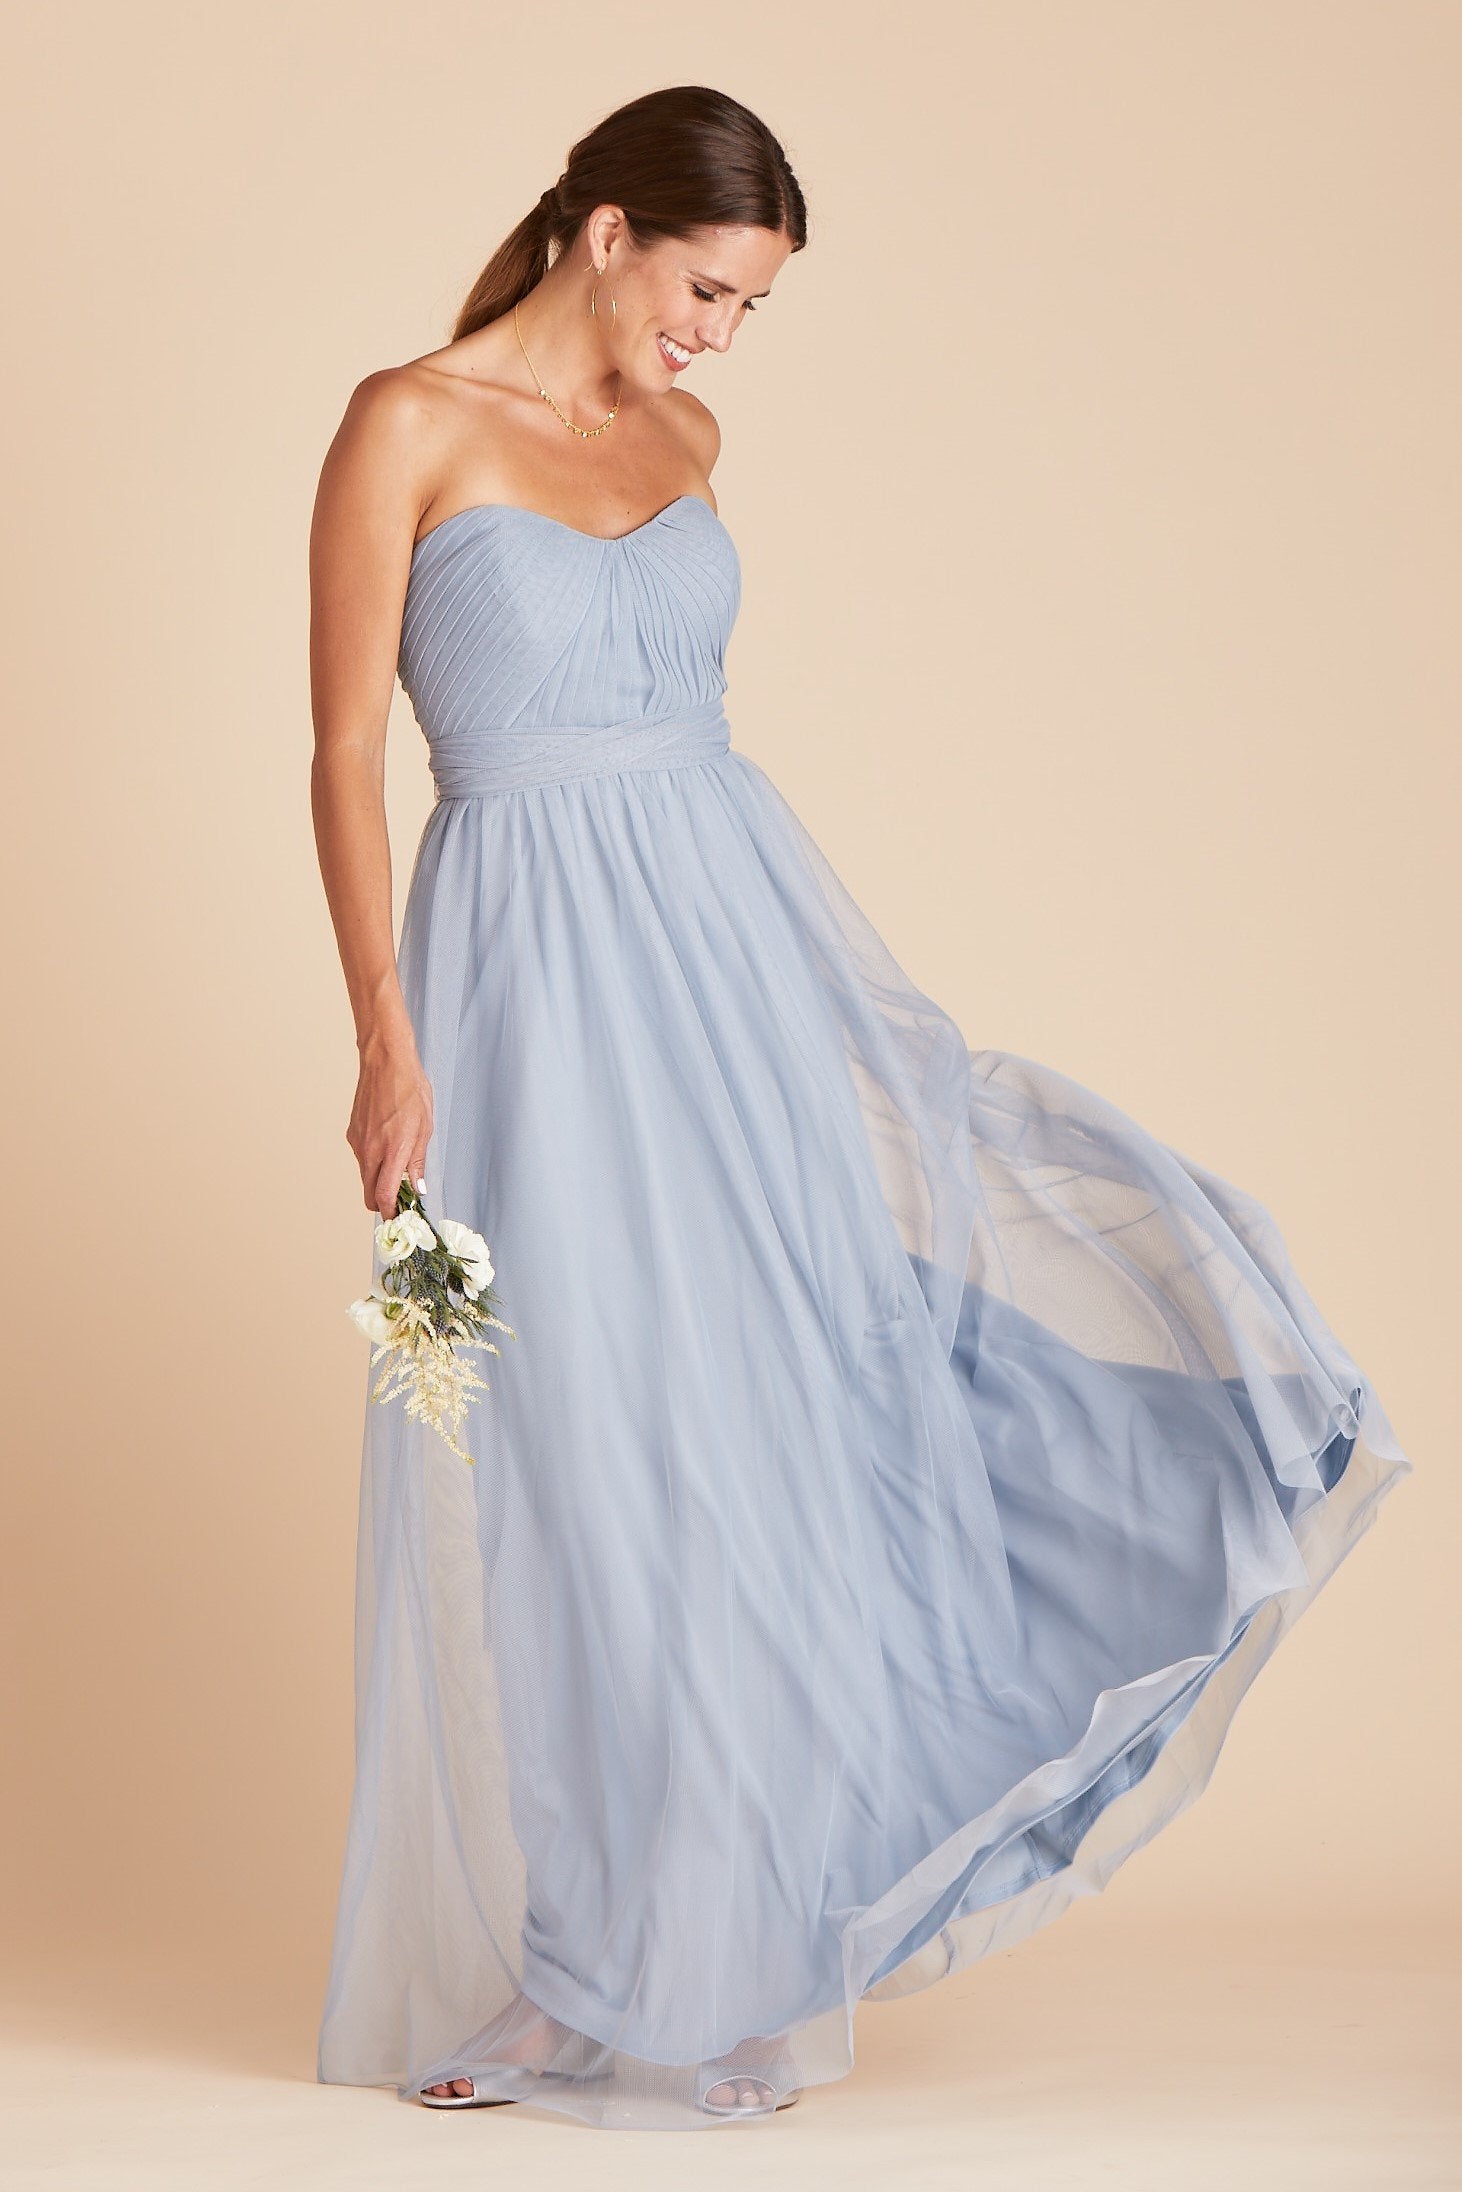 Christina convertible bridesmaid dress in dusty blue tulle by Birdy Grey, front view